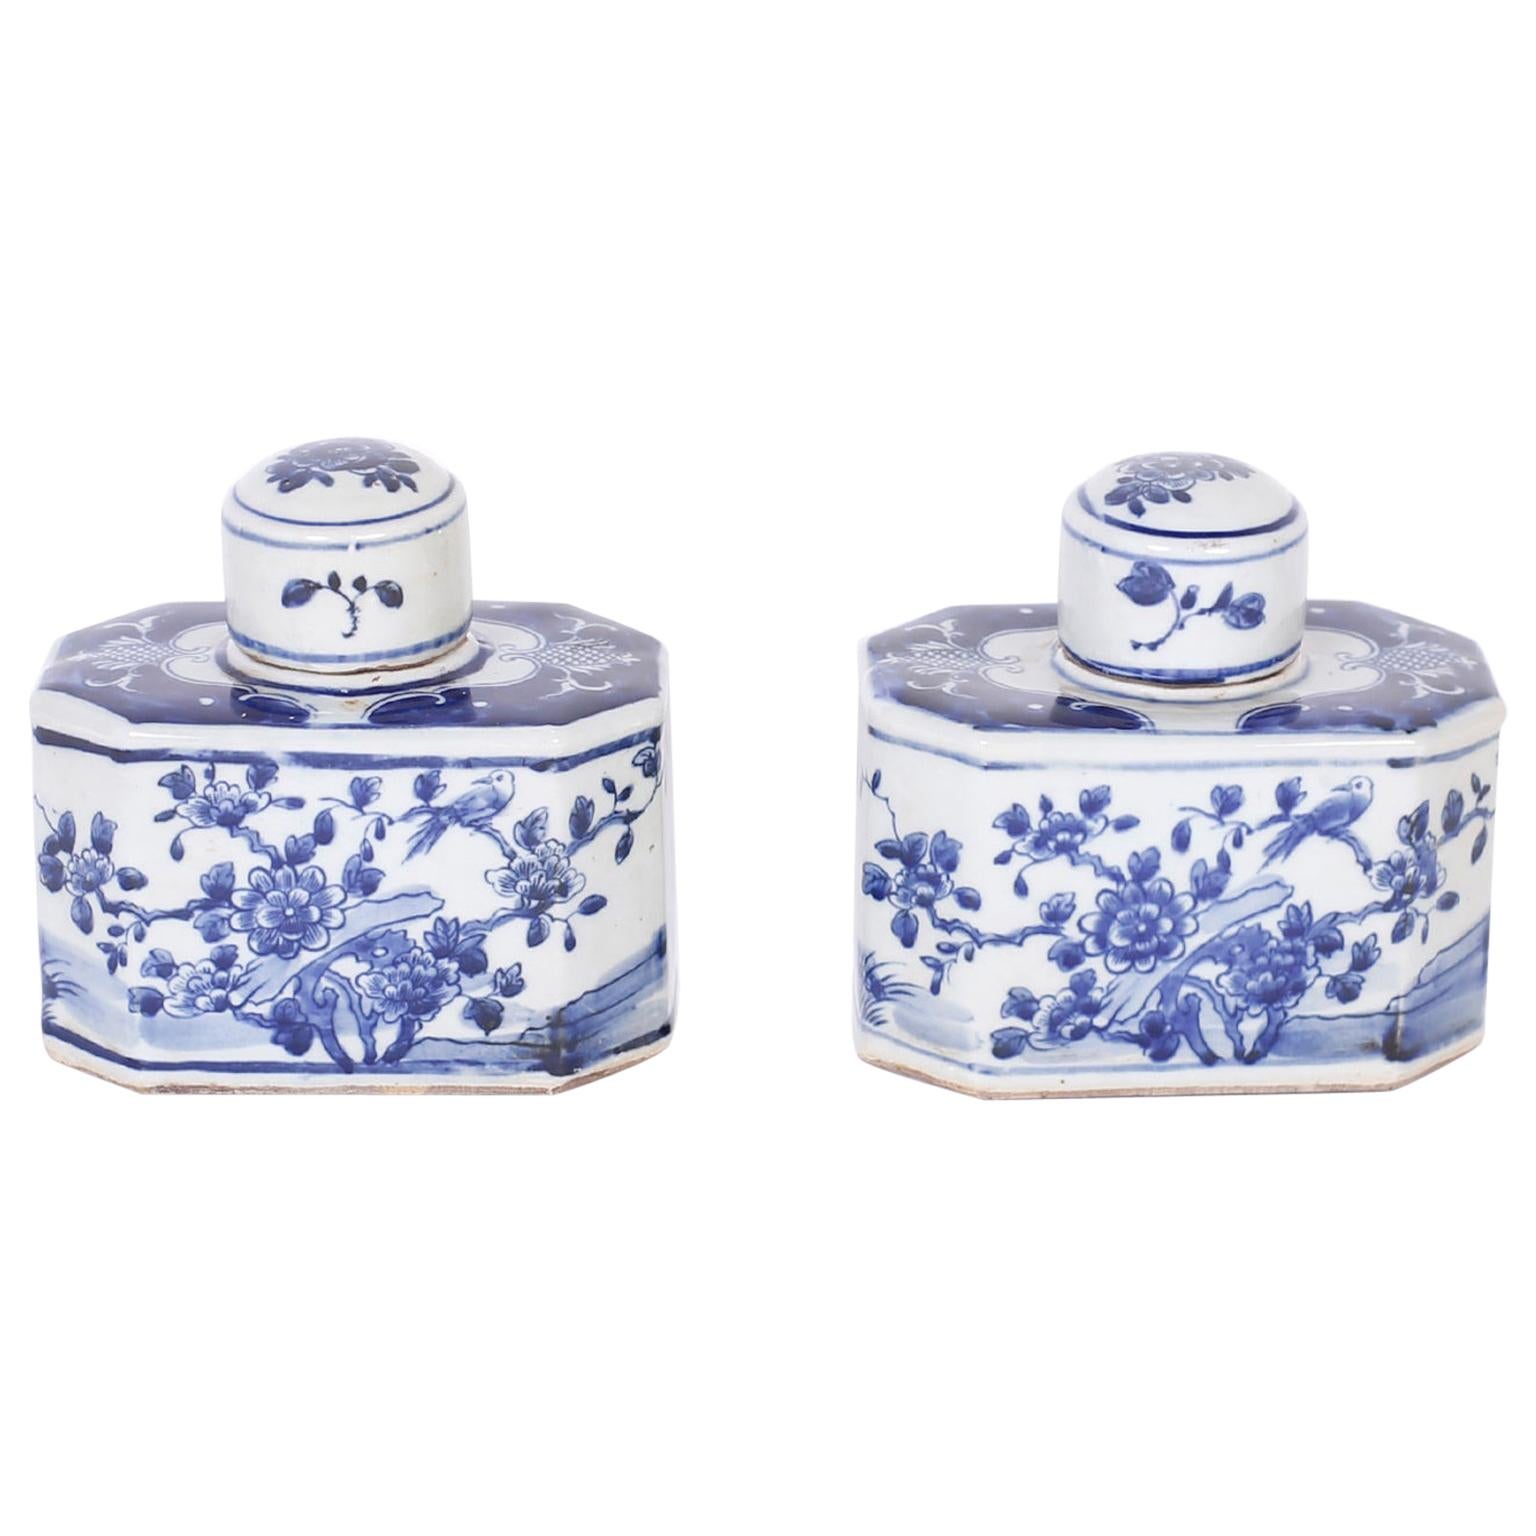 Pair of Blue and White Porcelain Tea Caddies with Flowers